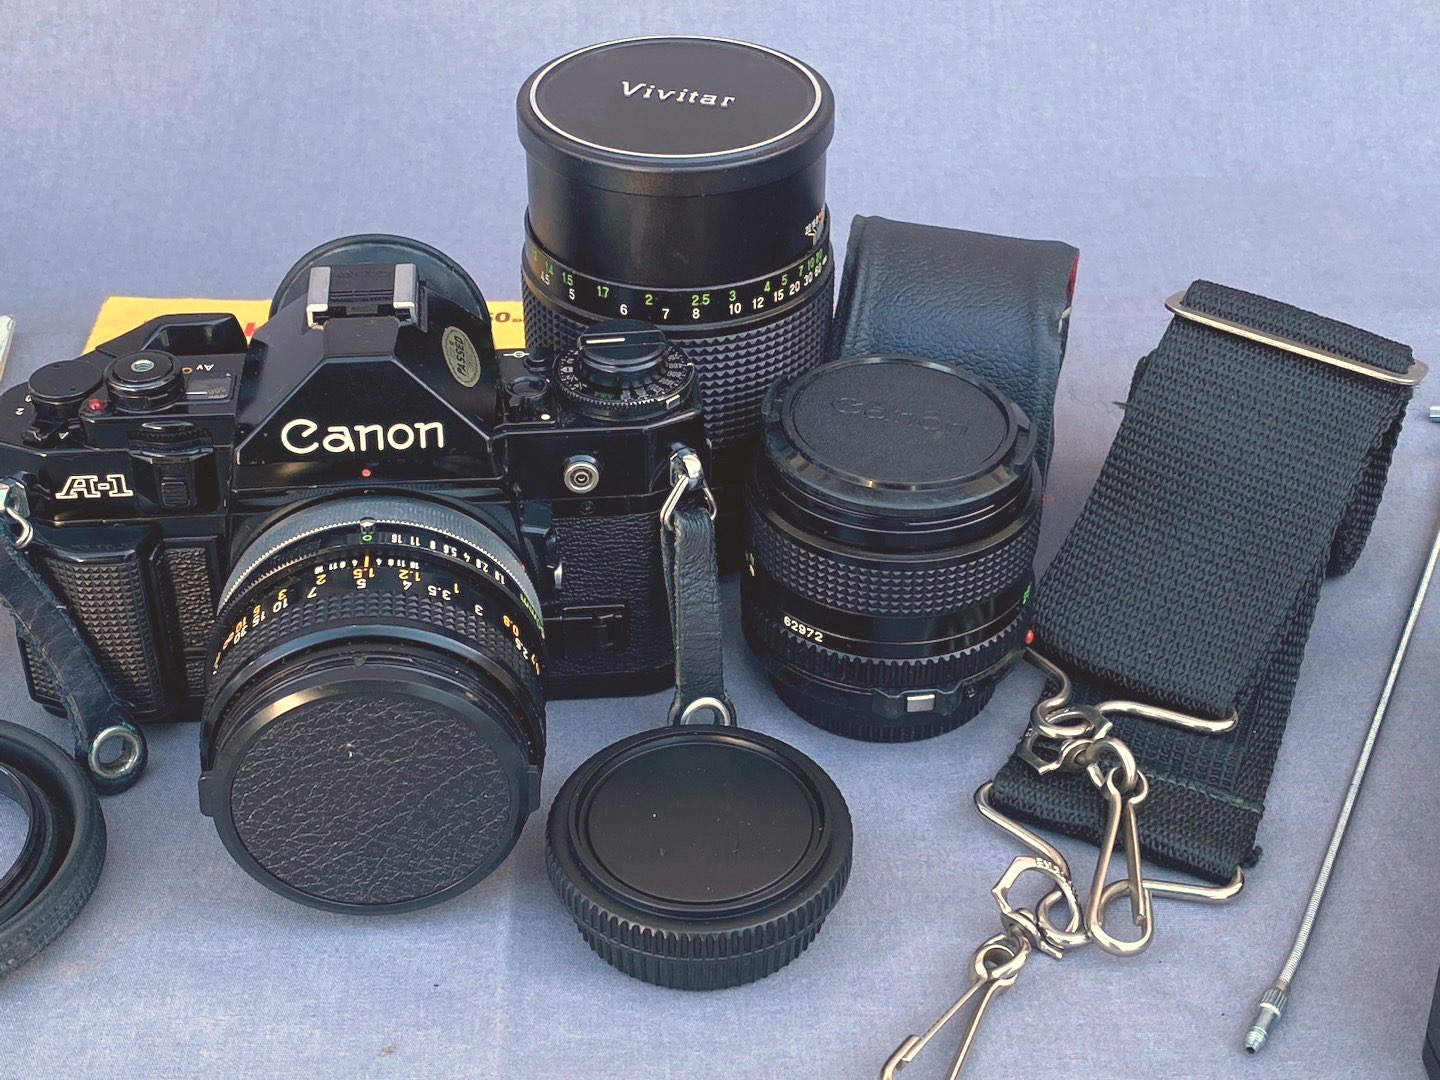 Canon-A-1-35mm-Film-Camera-With-50mm-F1-8-Canon-Lens-Tested-And